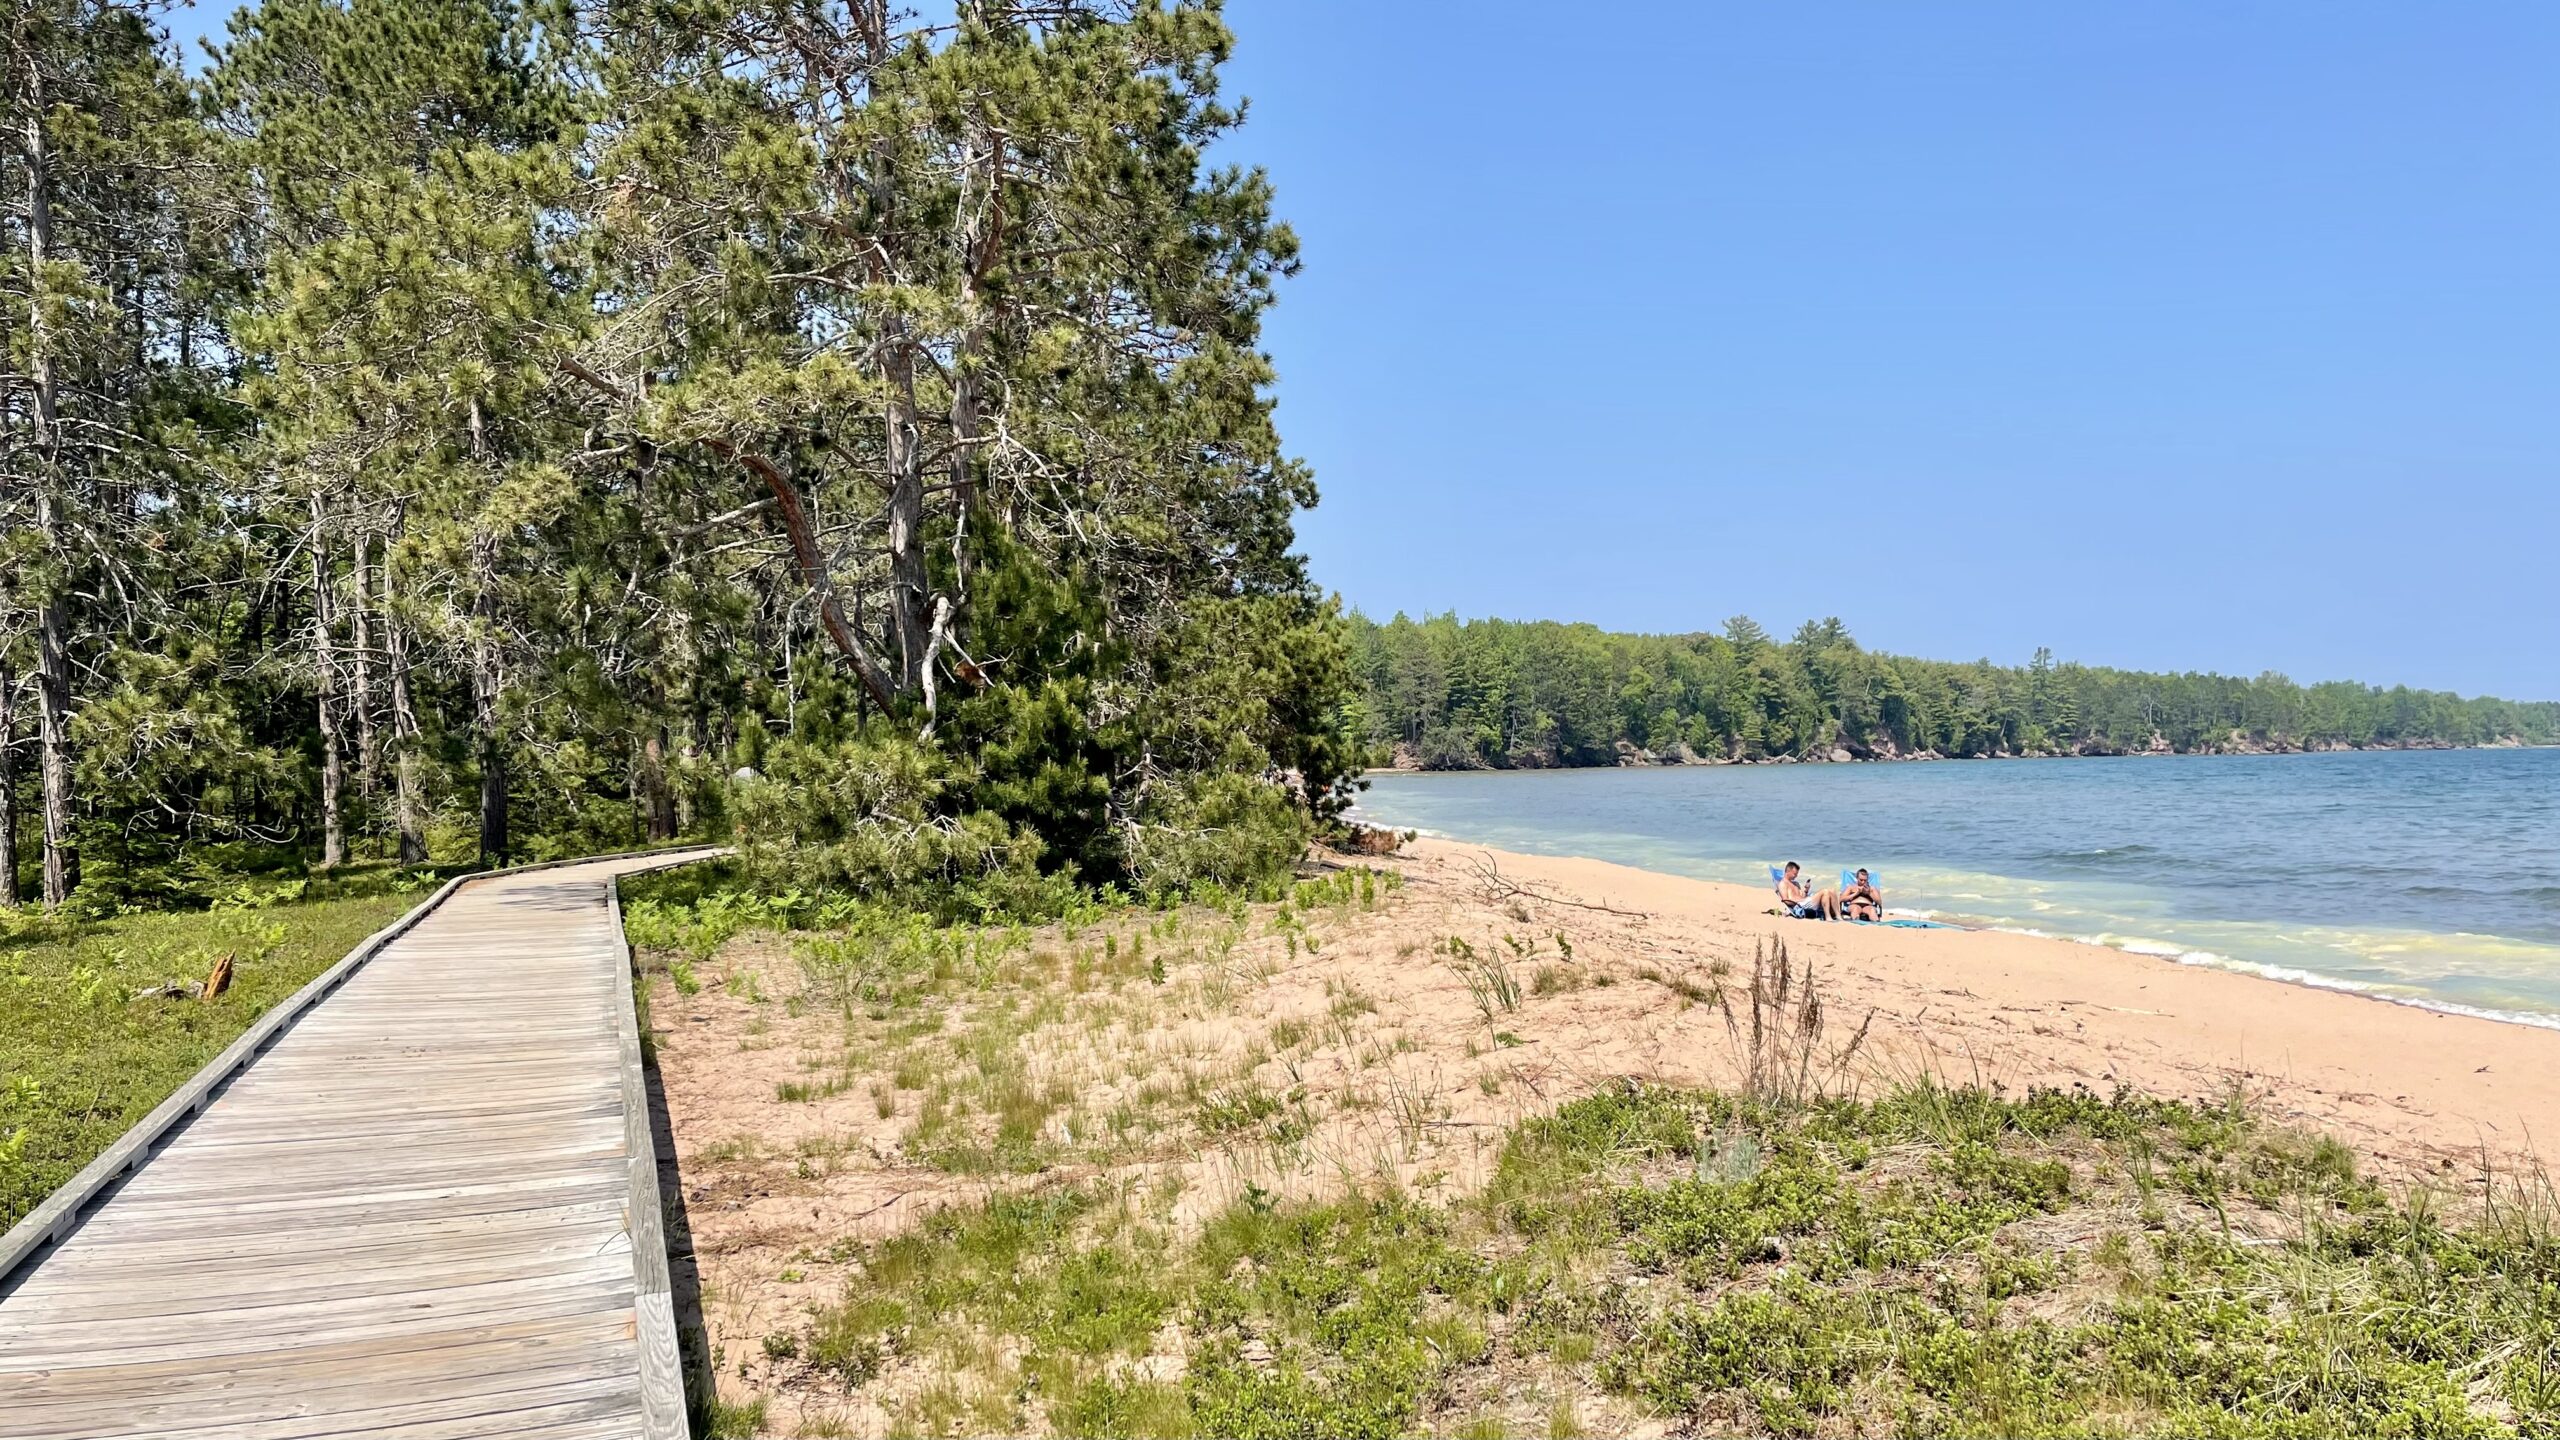 The beach at Big Bay Town Park on Madeline Island